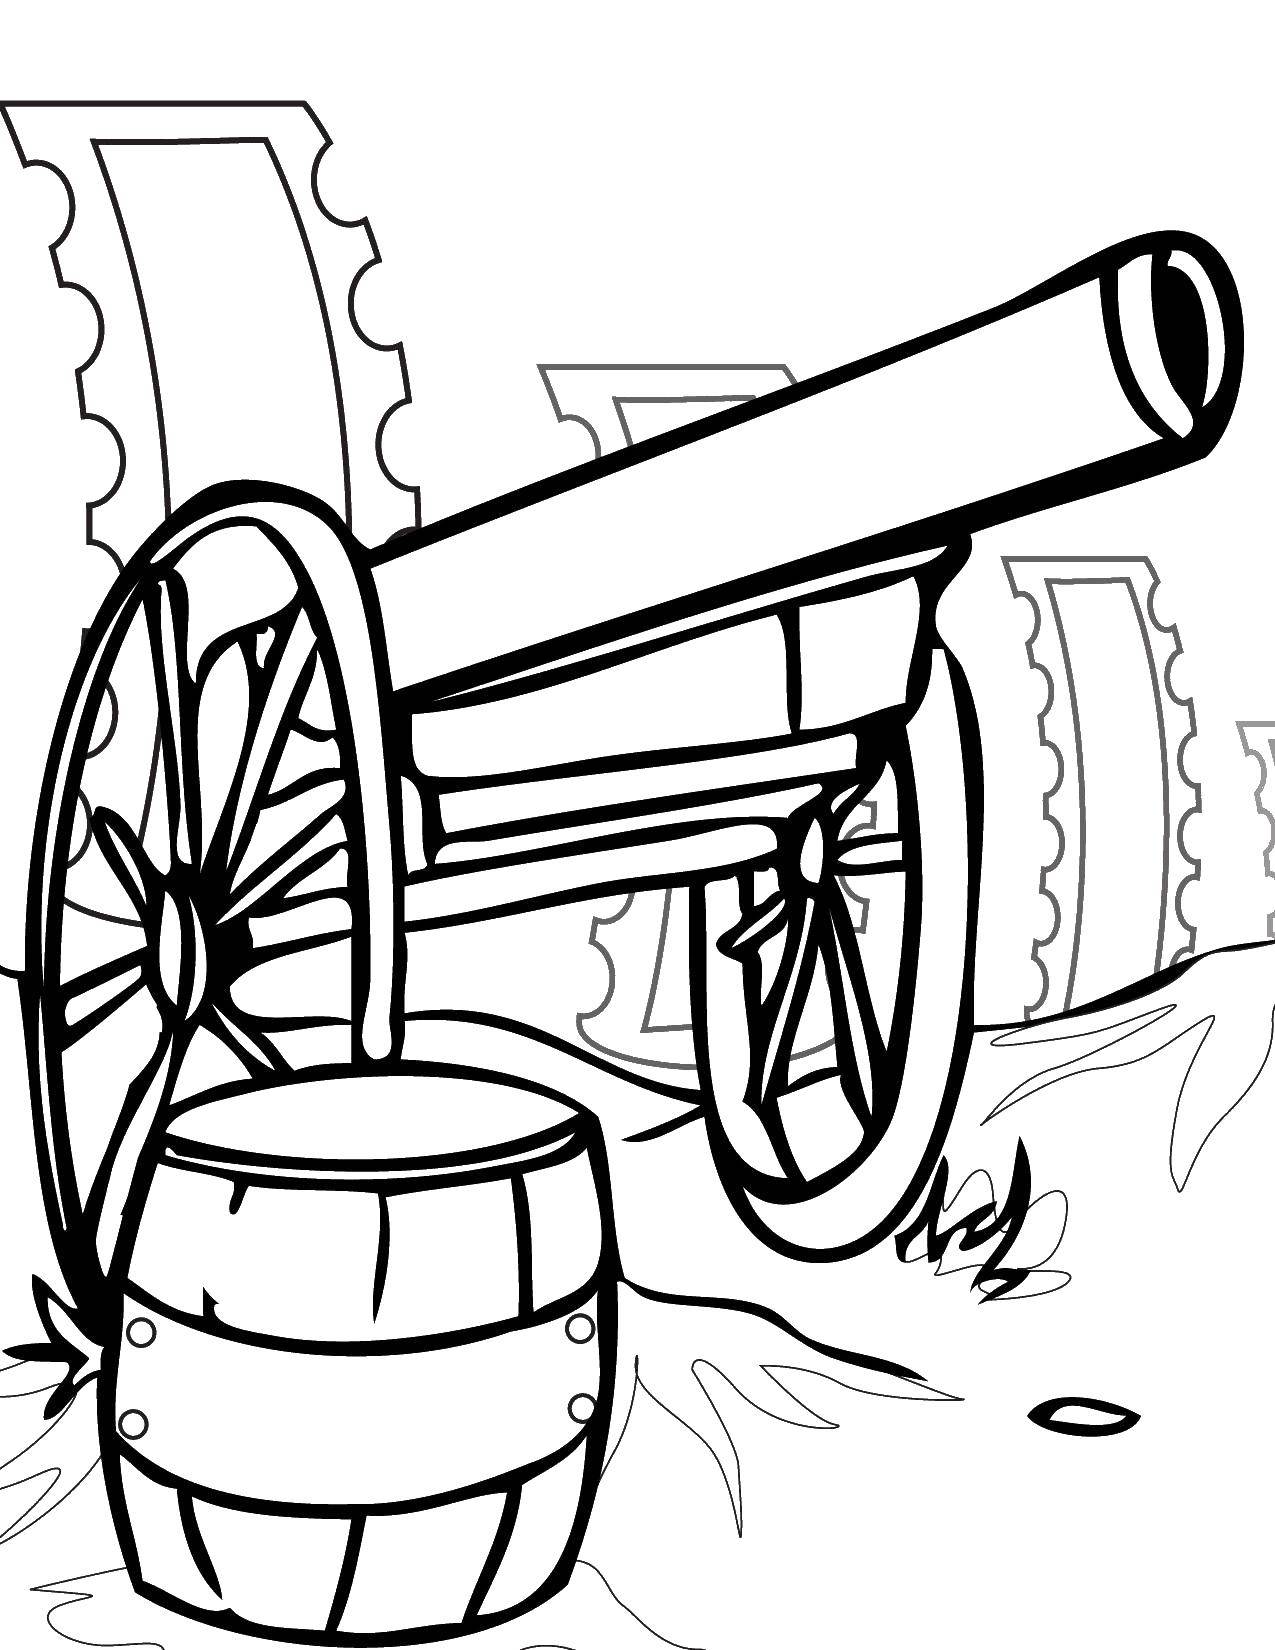 Coloring Medieval cannon. Category weapons. Tags:  Weapons.